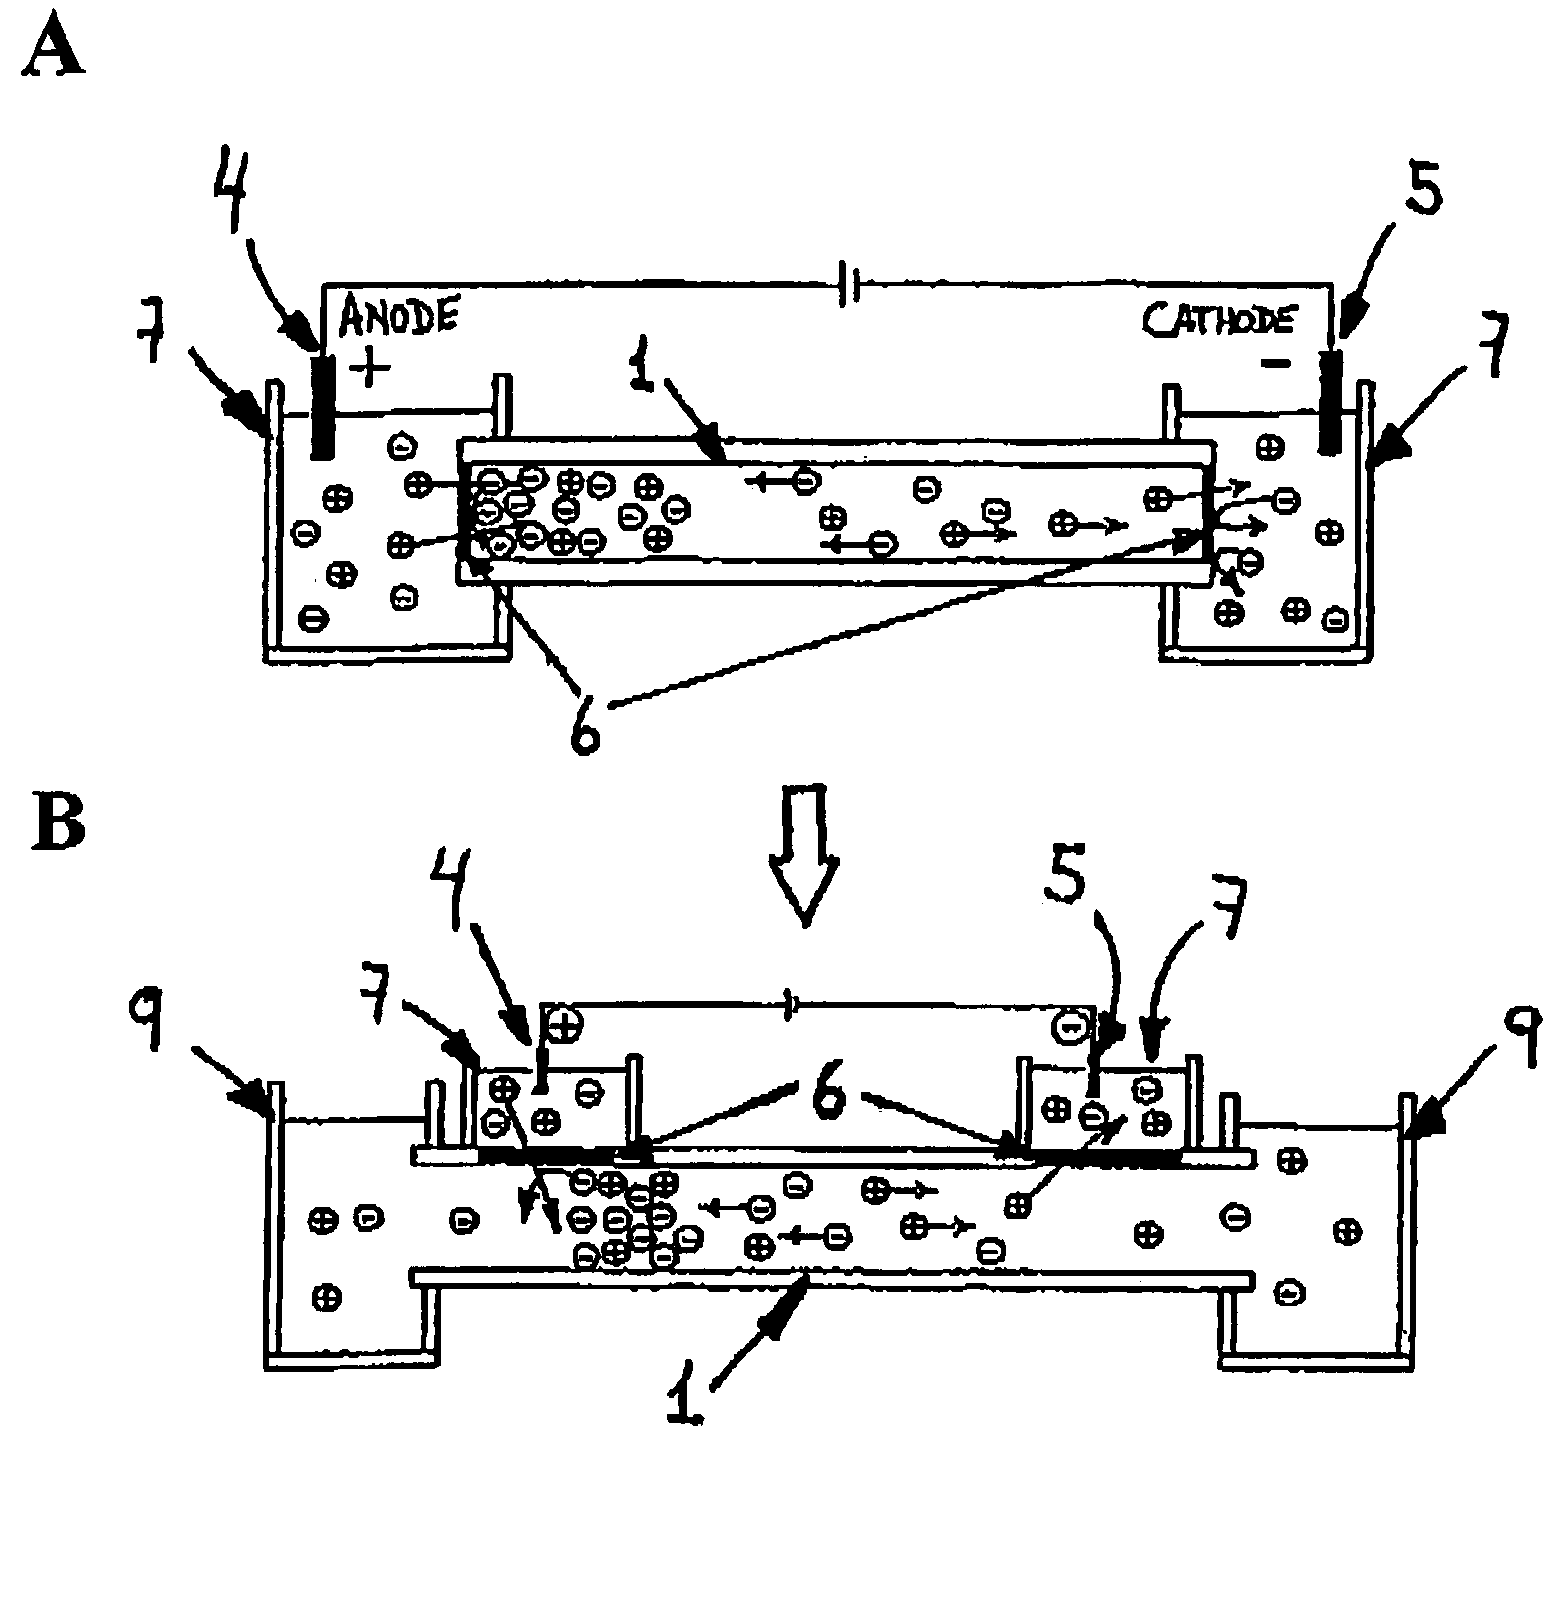 Method for capturing charged molecules traveling in a flow stream